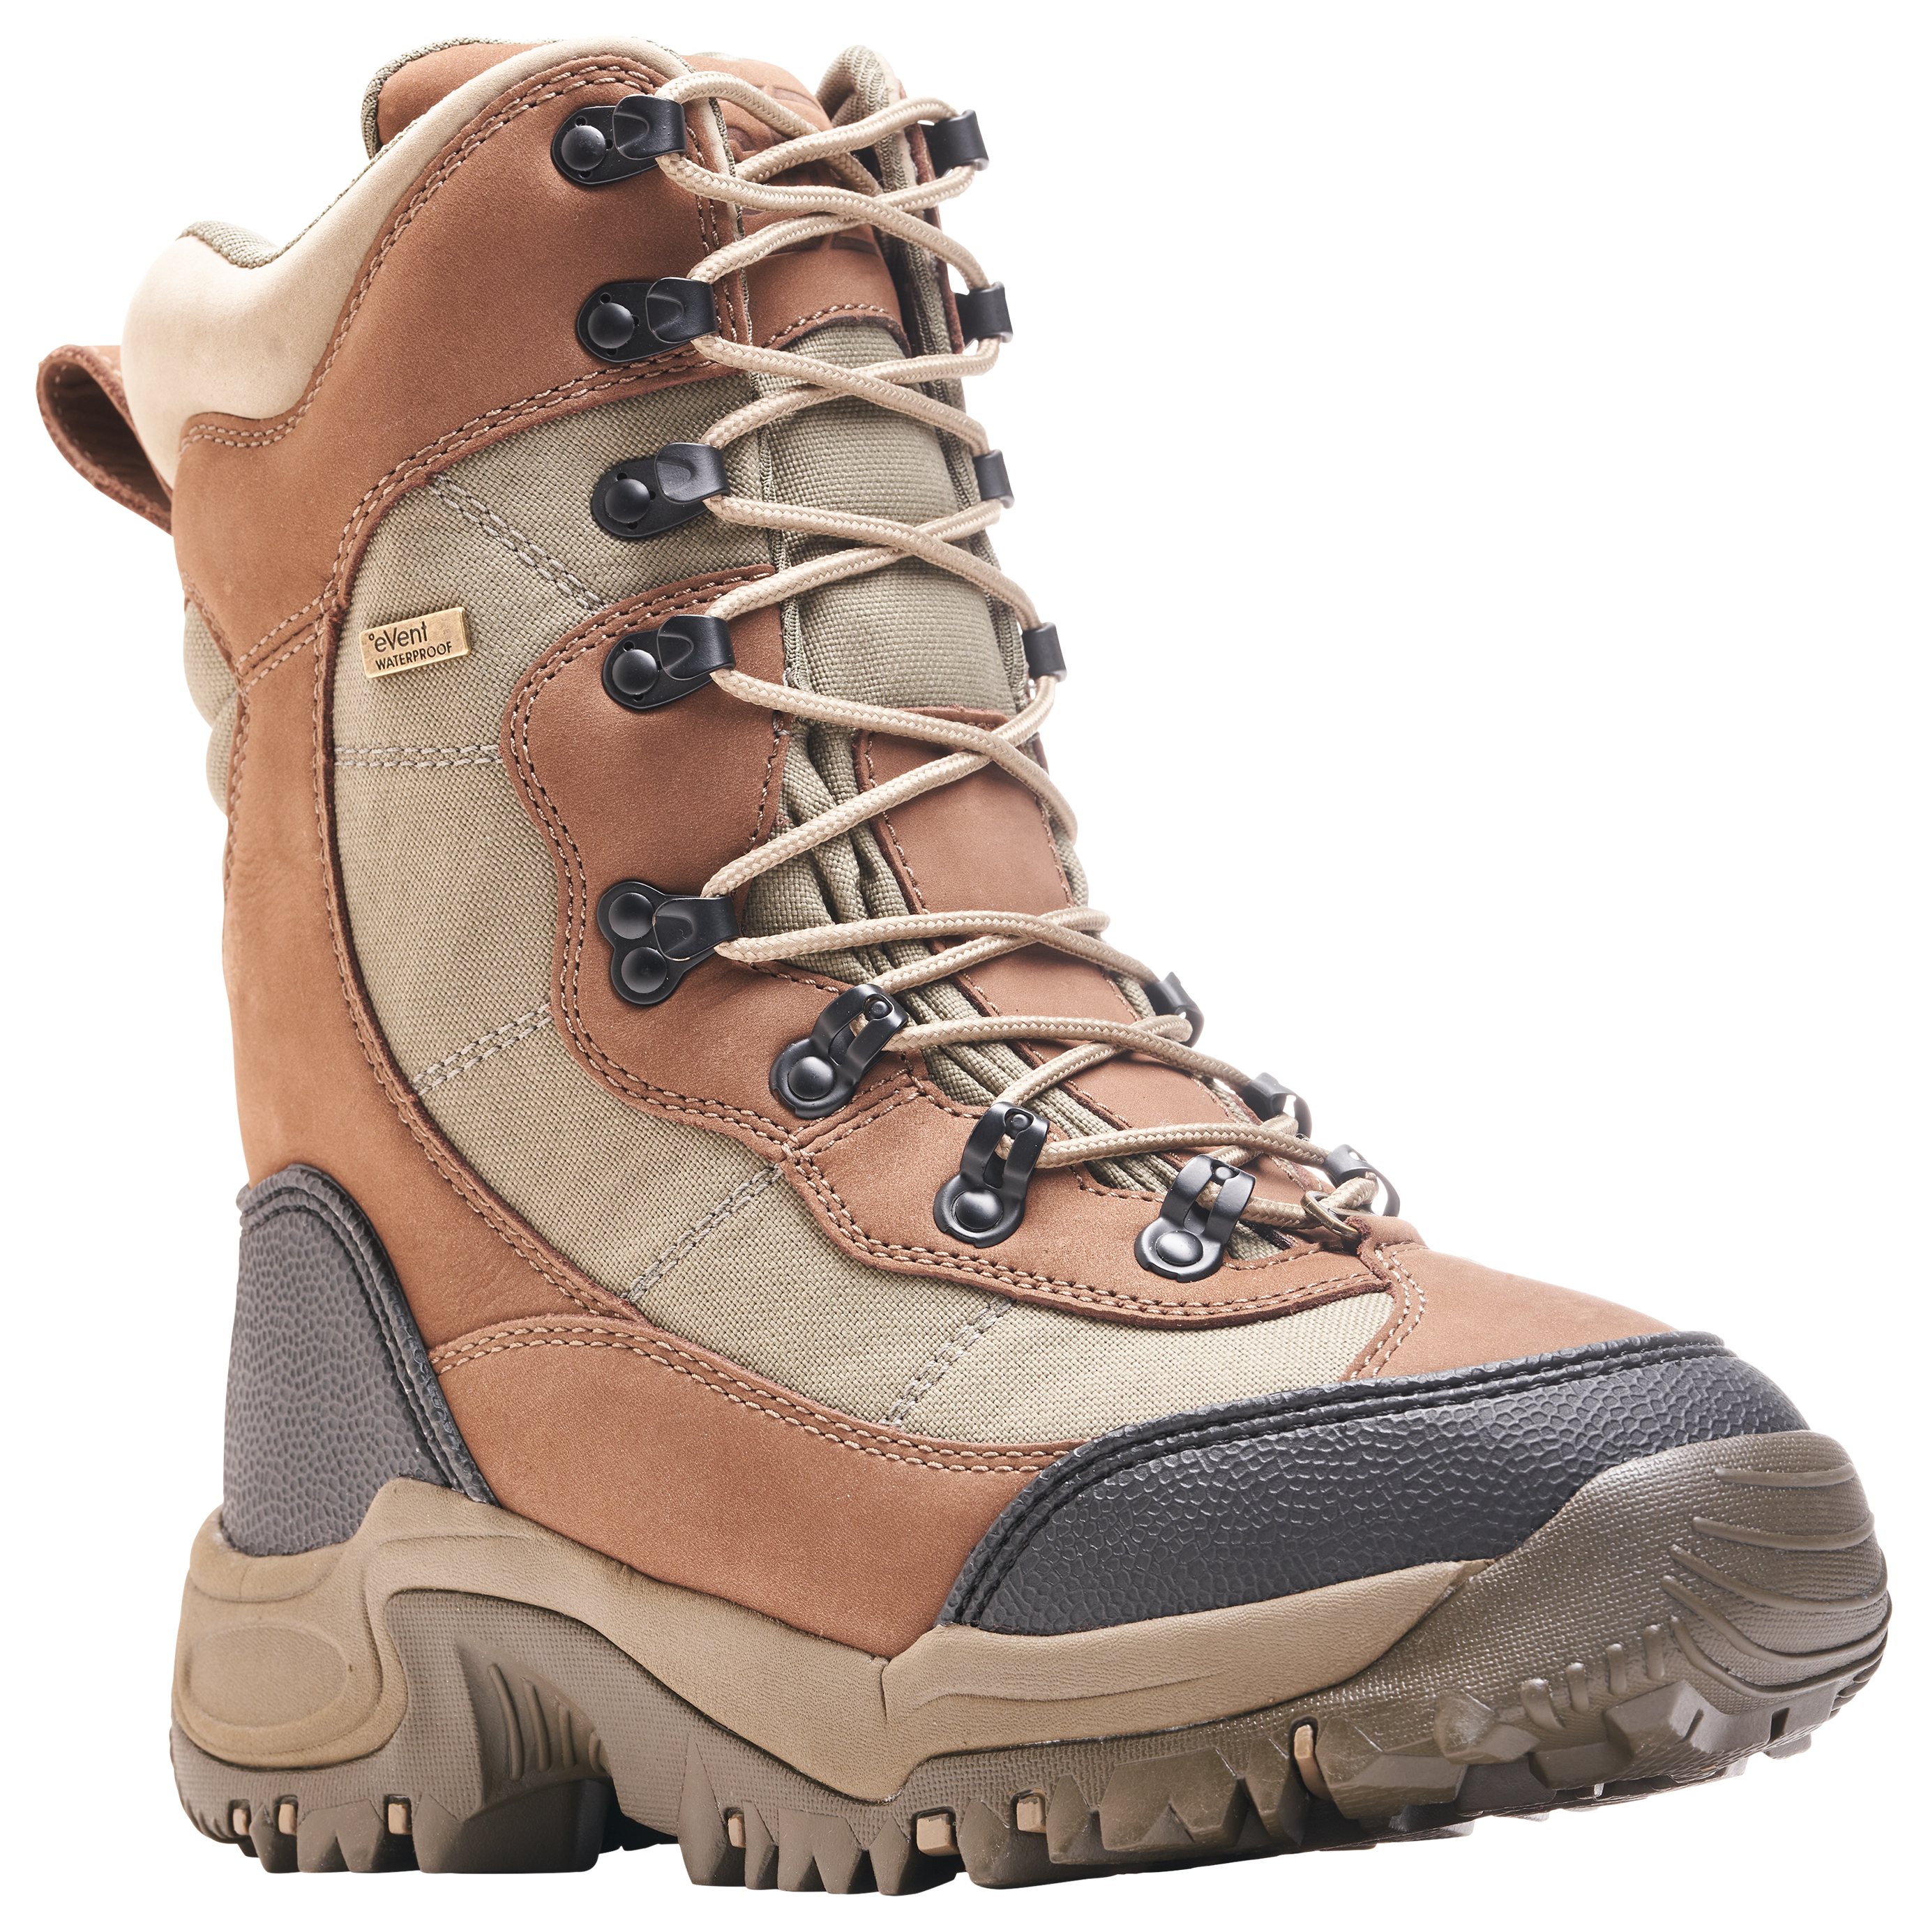 SHE Outdoor Inferno II Insulated Waterproof Hunting Boots for Ladies - Brown - 7M